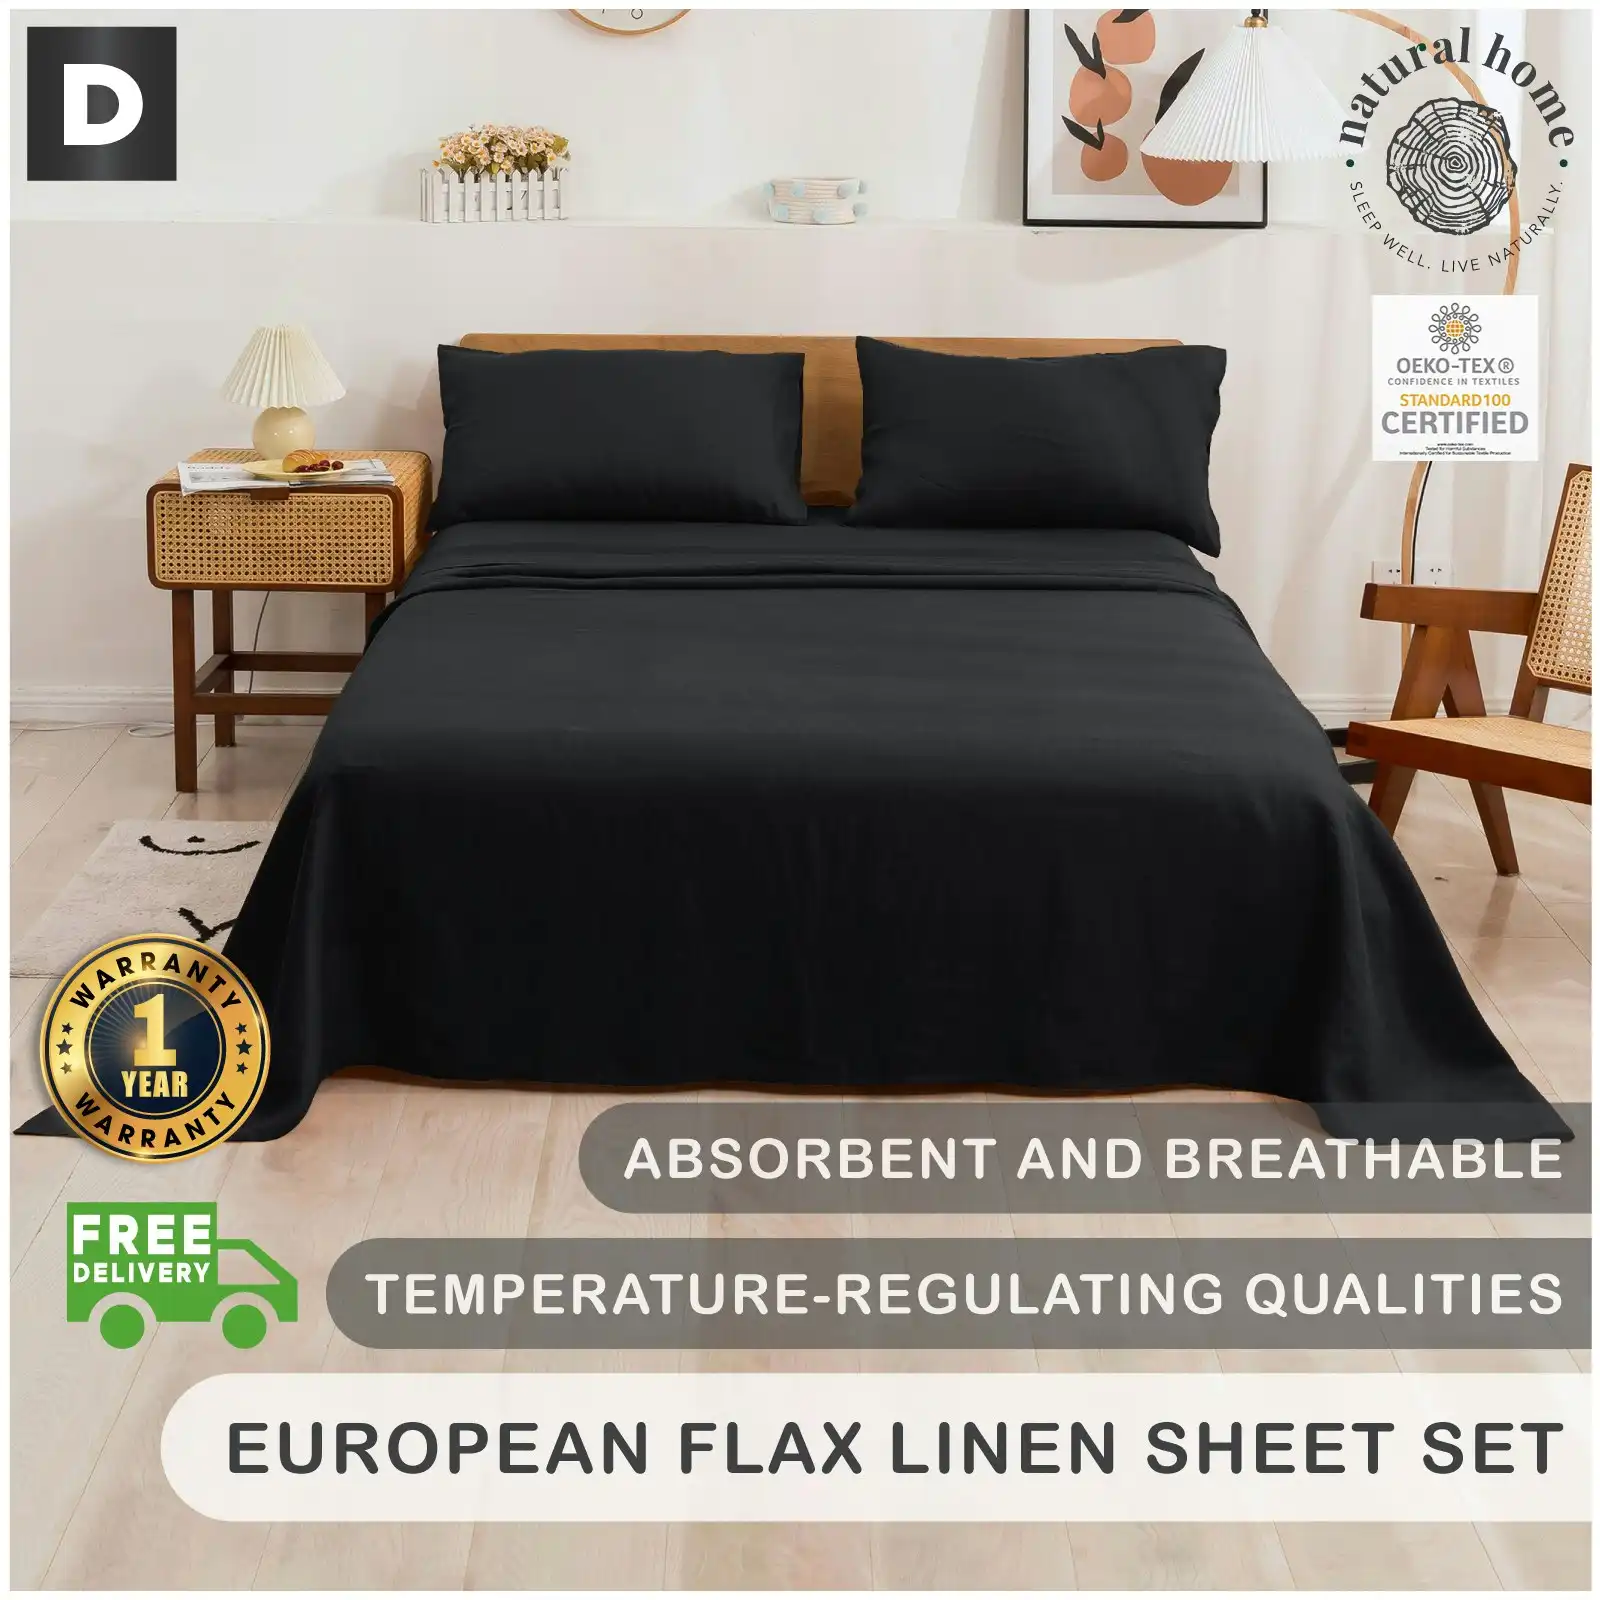 Natural Home 100% European Flax Linen Sheet Set Charcoal Double Bed